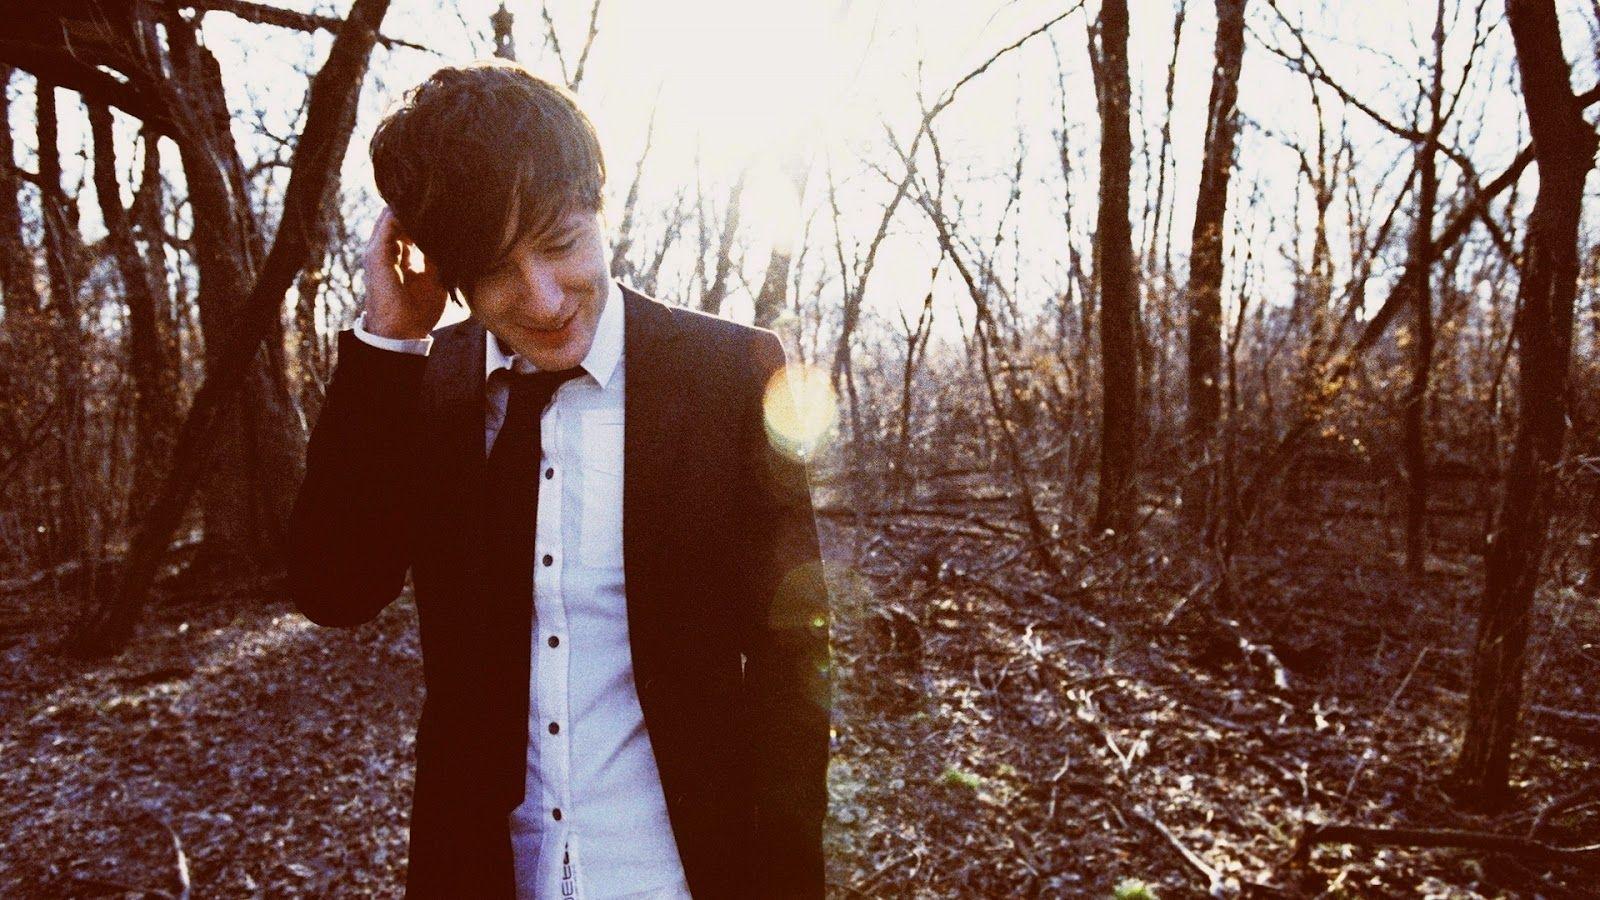 Awesome owl city wallpaper HD image. Owl City Is Adam Young